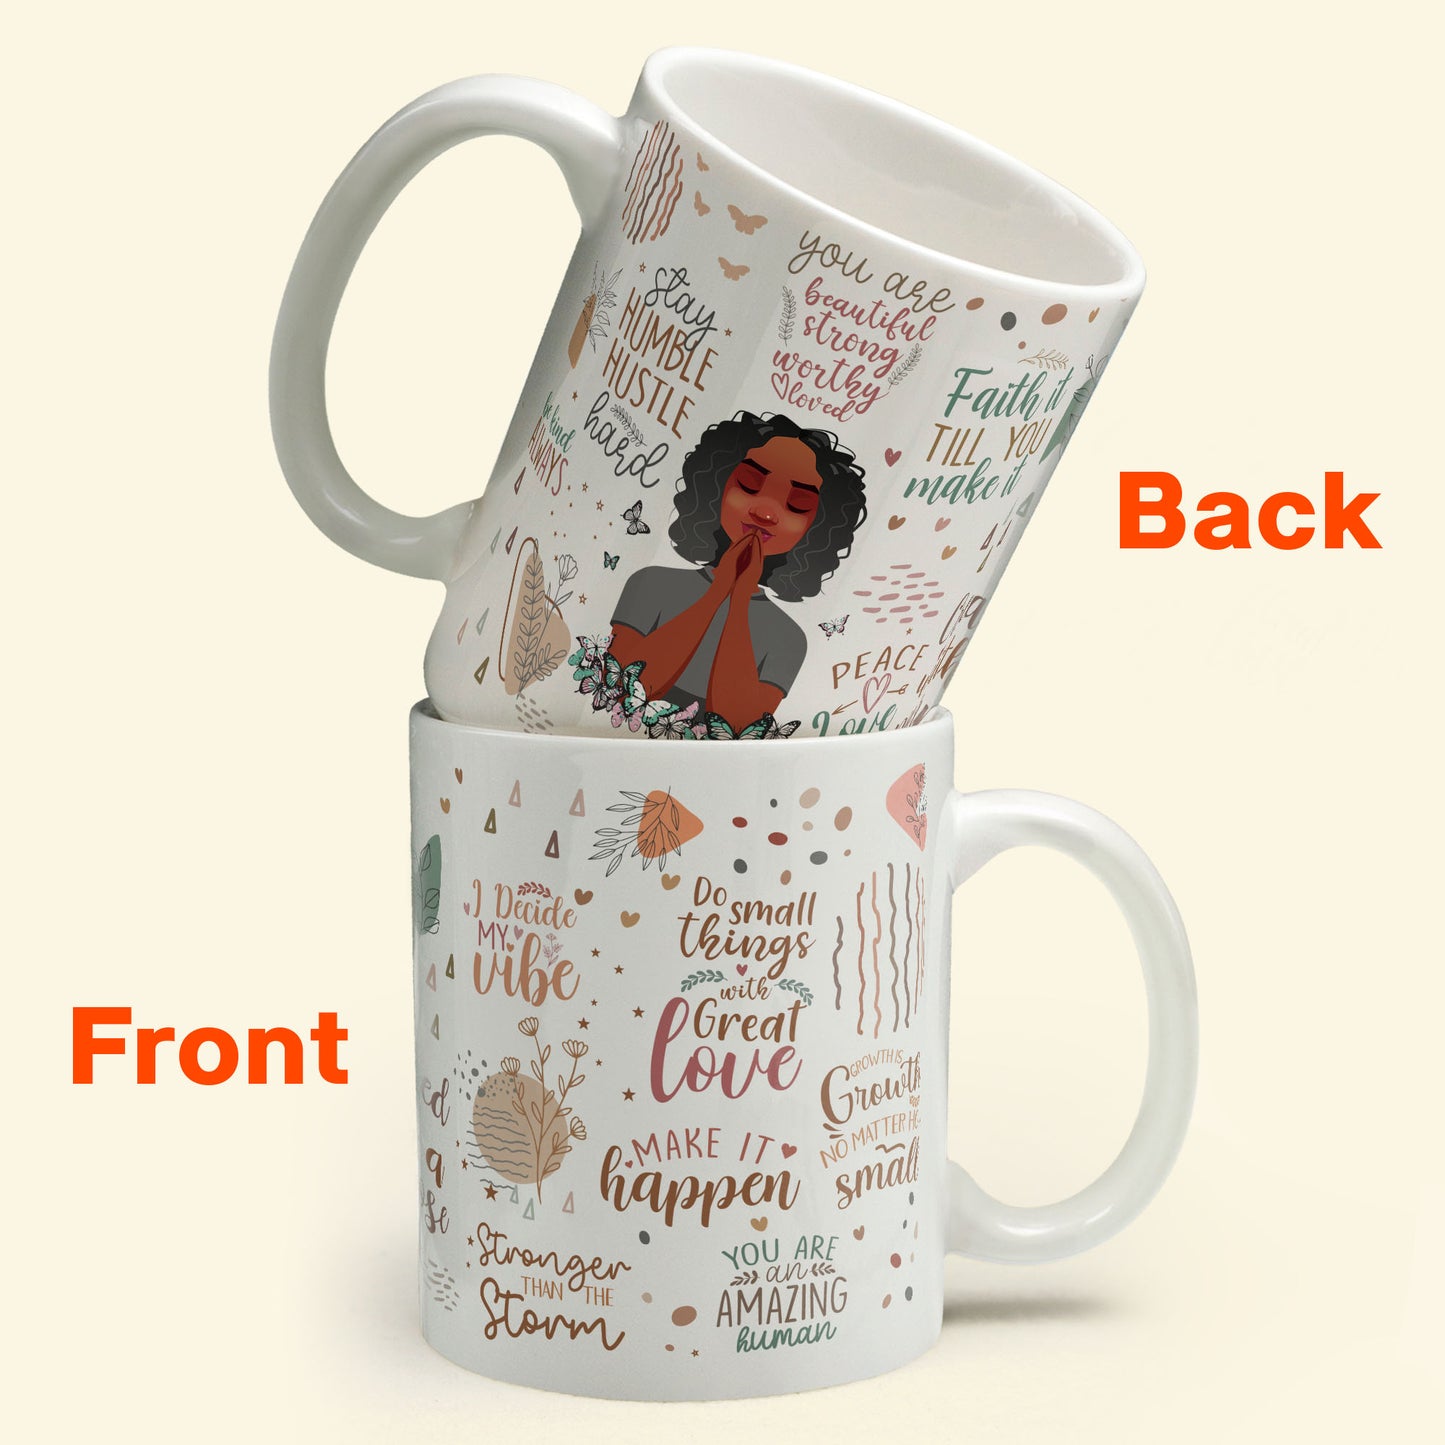 Stronger Than The Storm - Personalized Mug